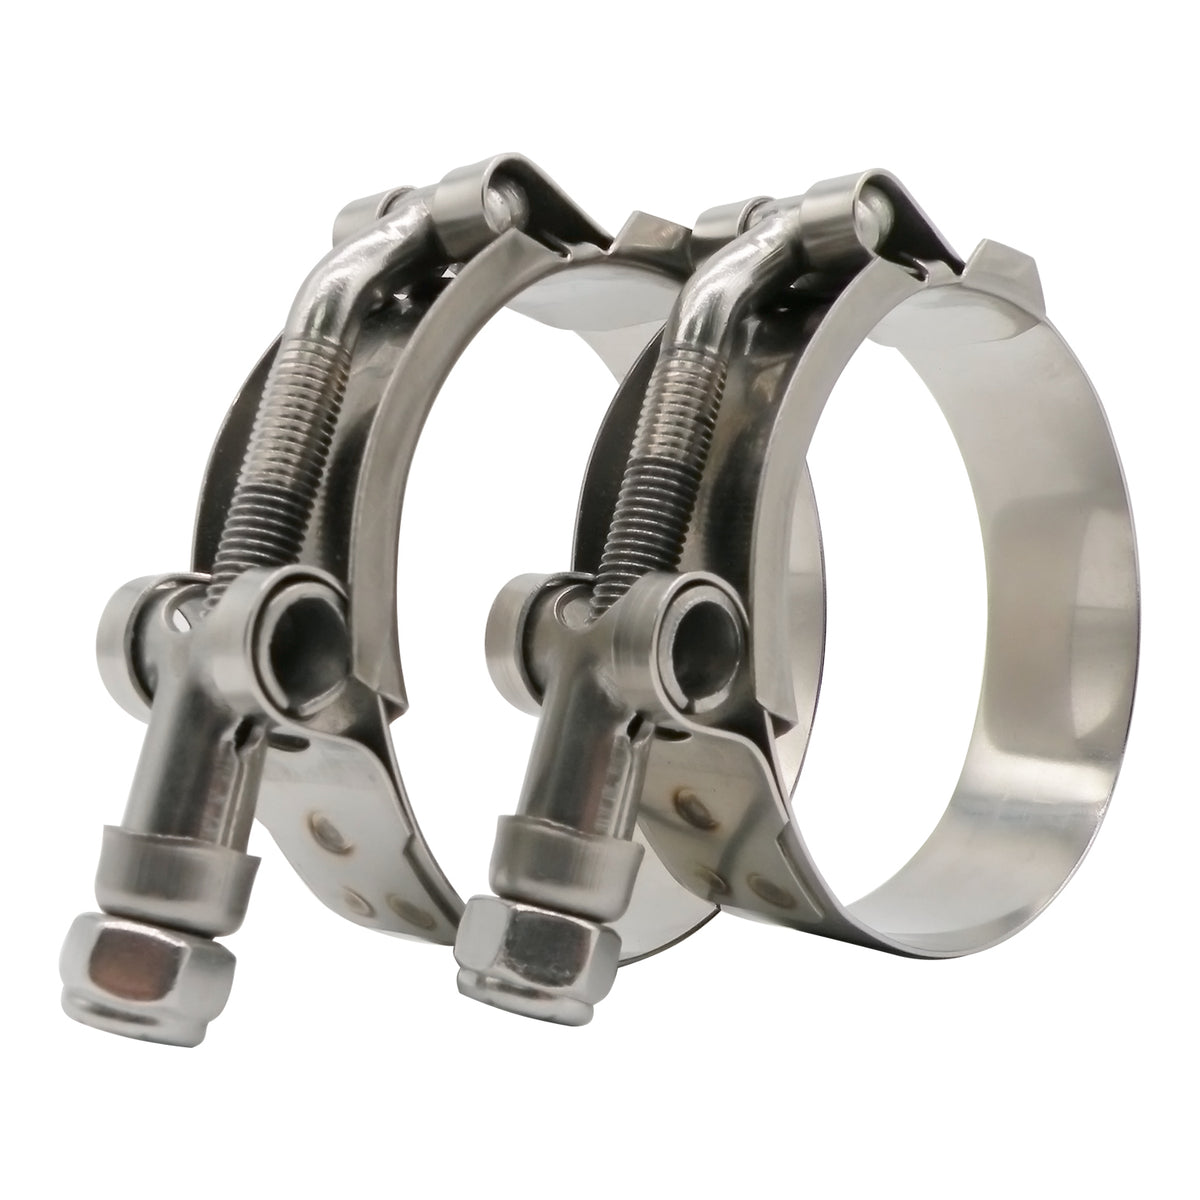 T bolt clamp